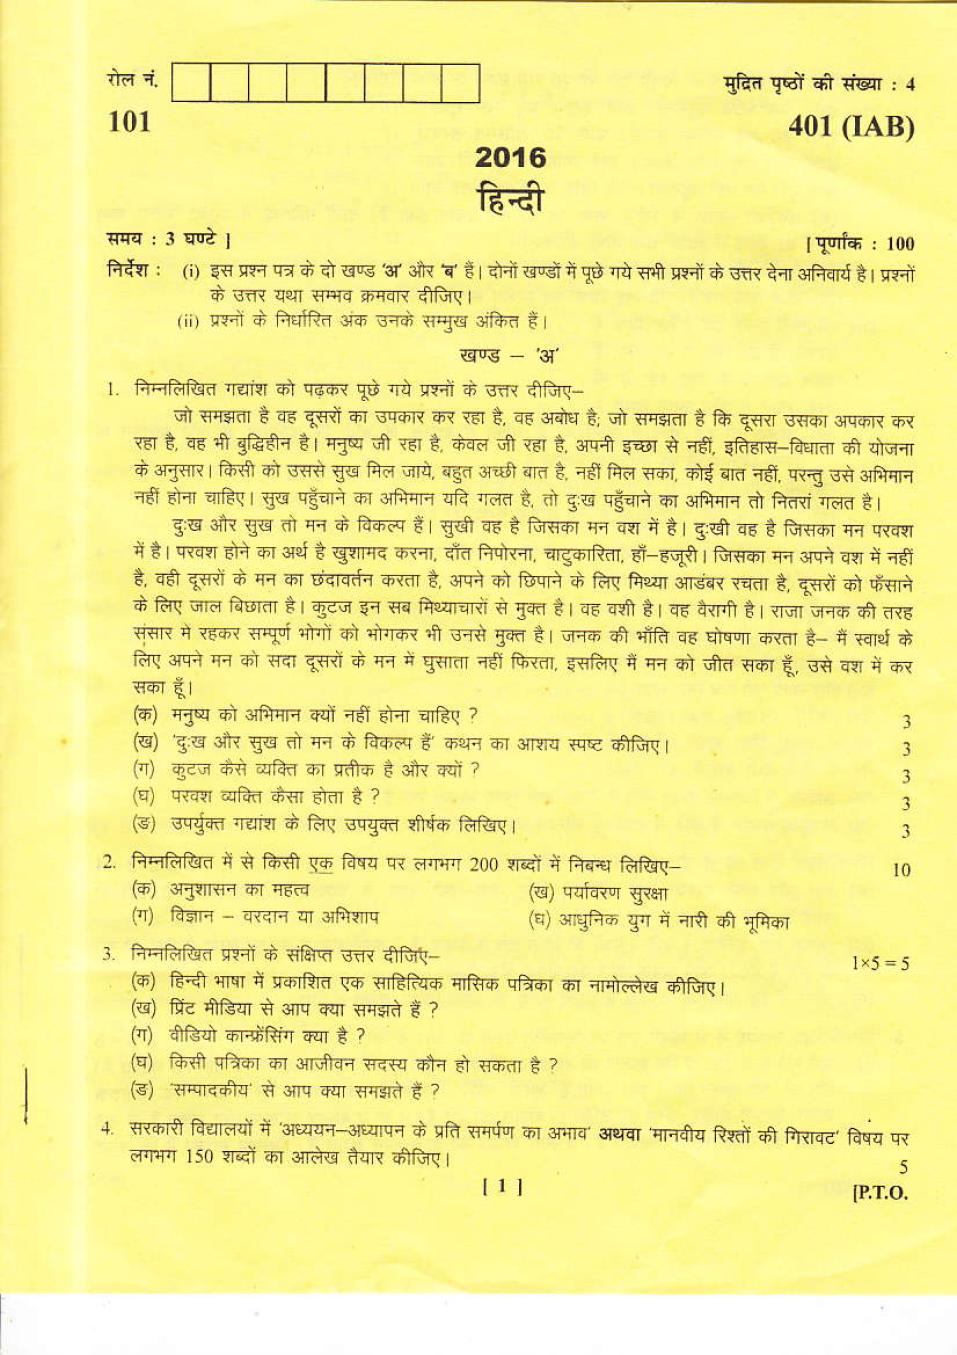 Uttarakhand Board Class 12 Question Paper 2016 for Hindi - Page 1